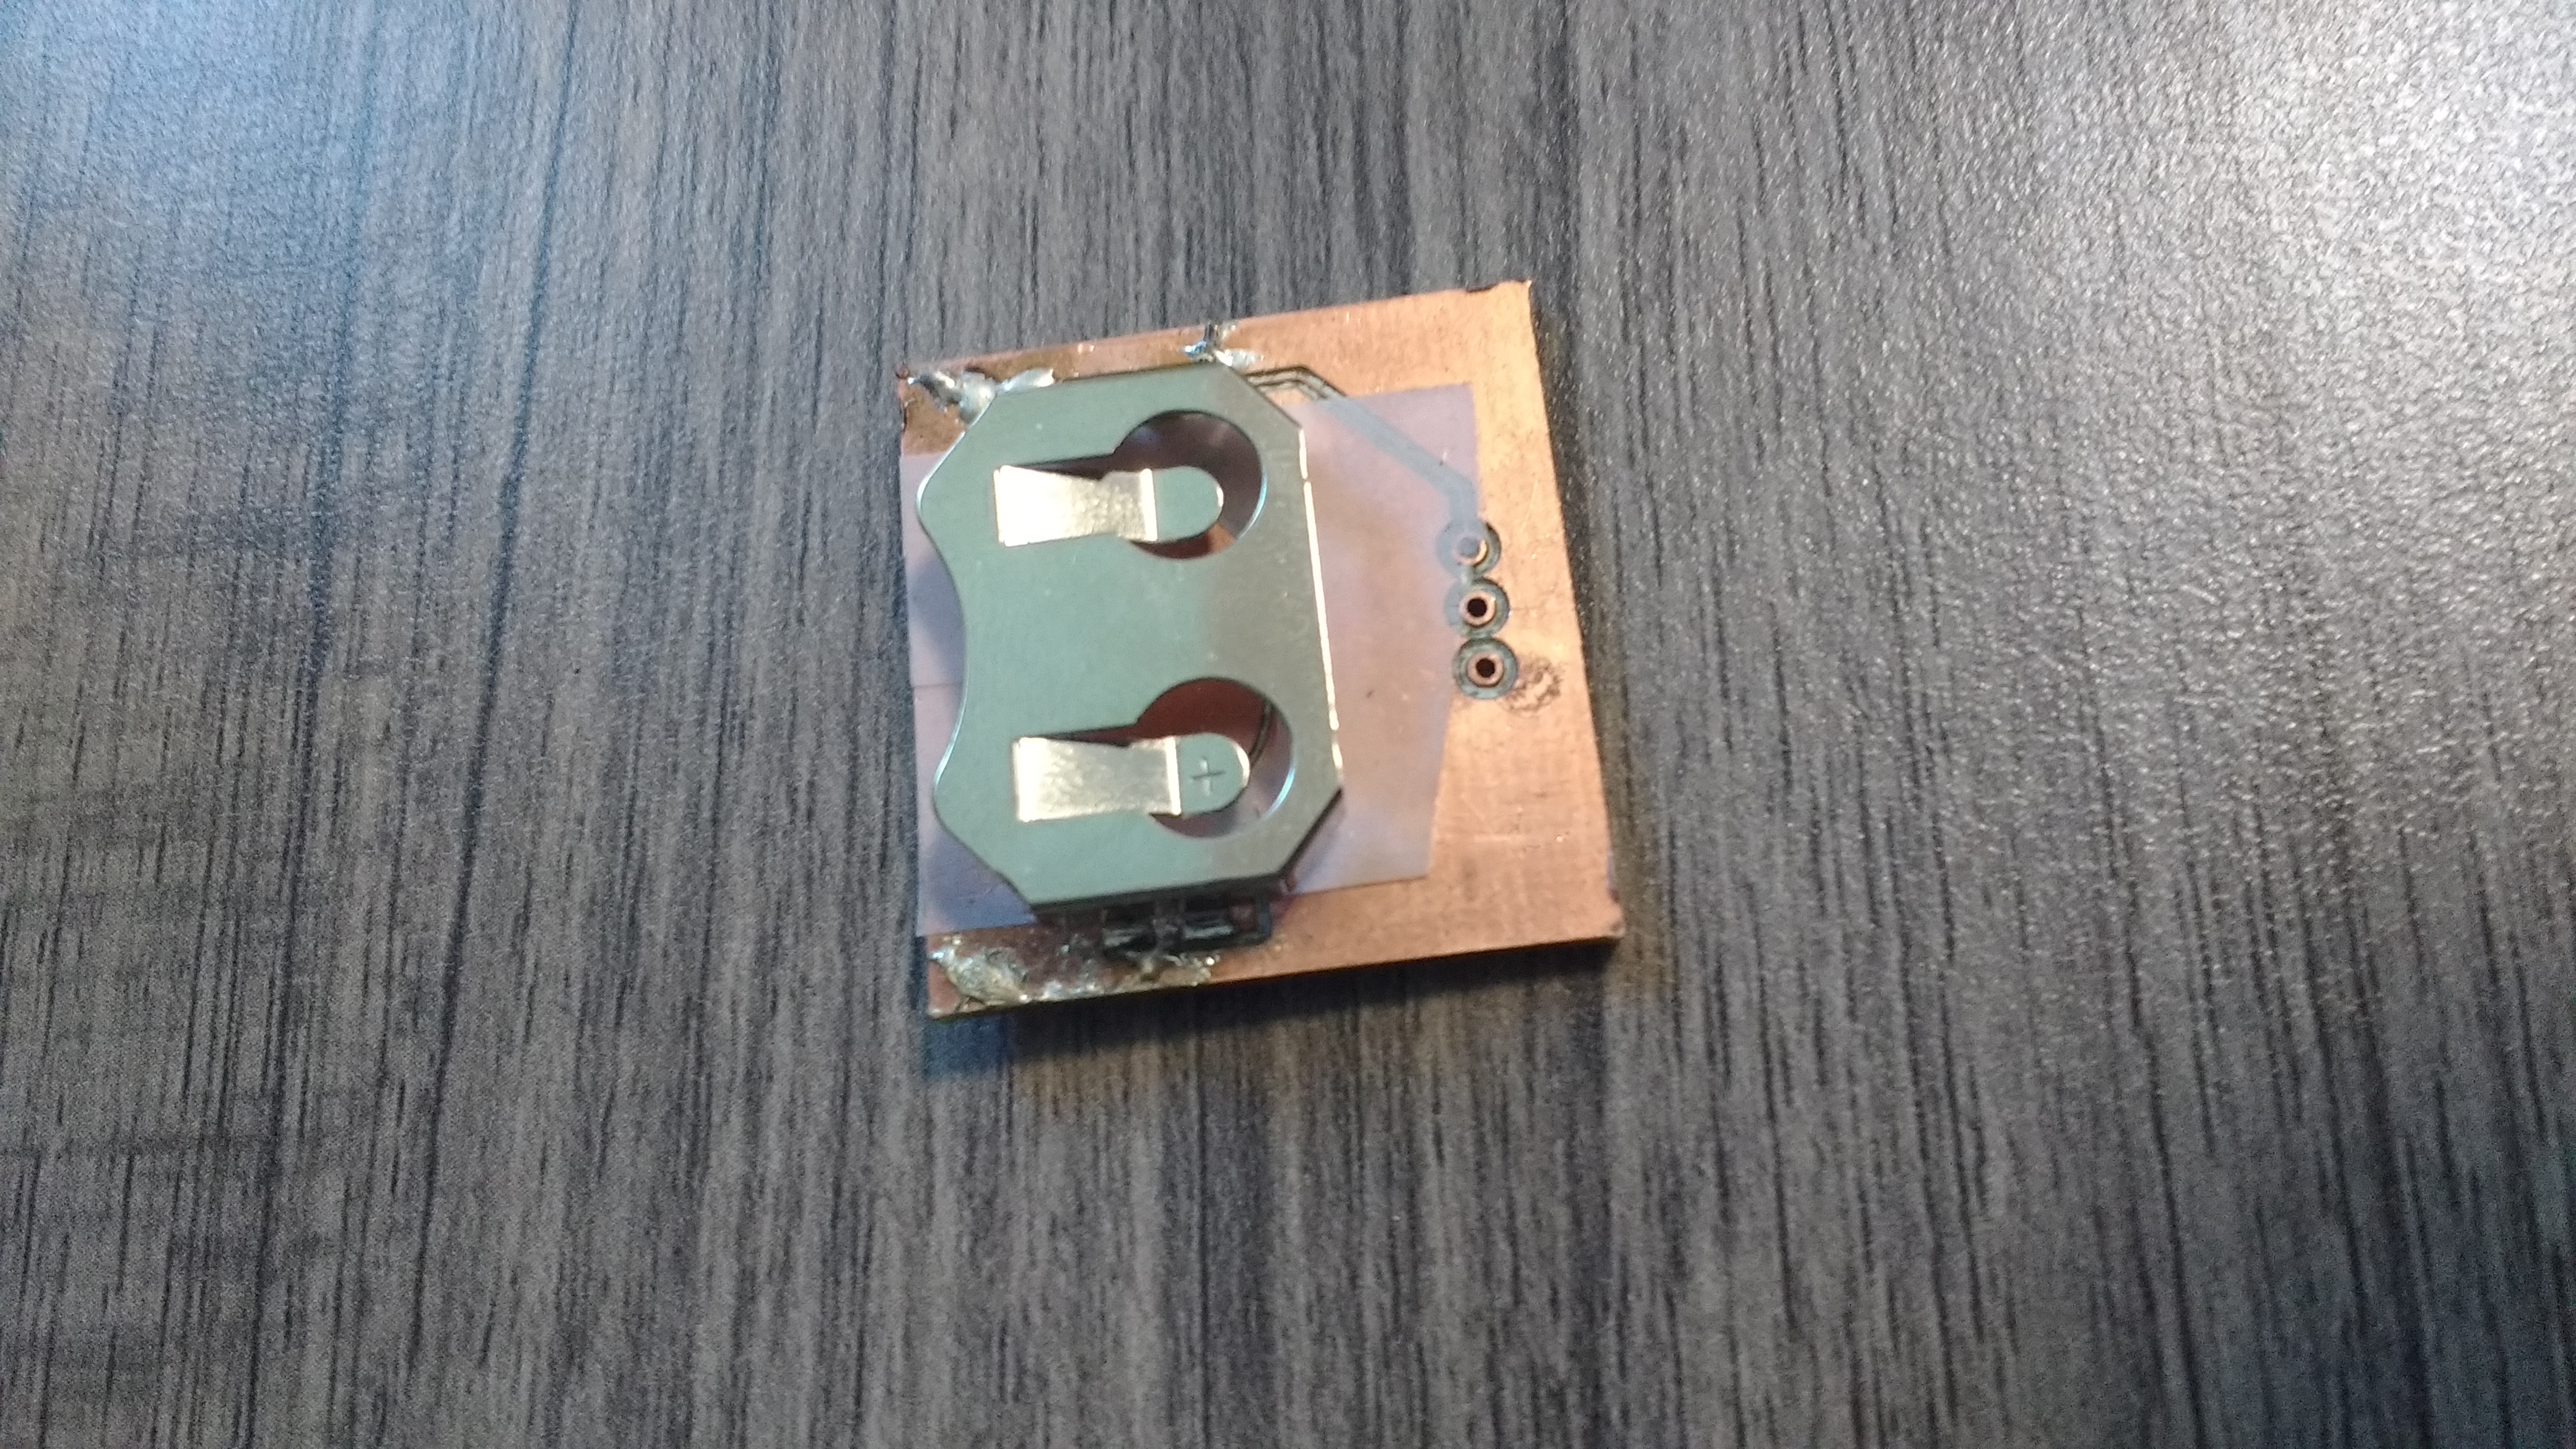 the bottom a 1 inch by 1 inch  copper PCB.  It has a battery holder soldered onto it